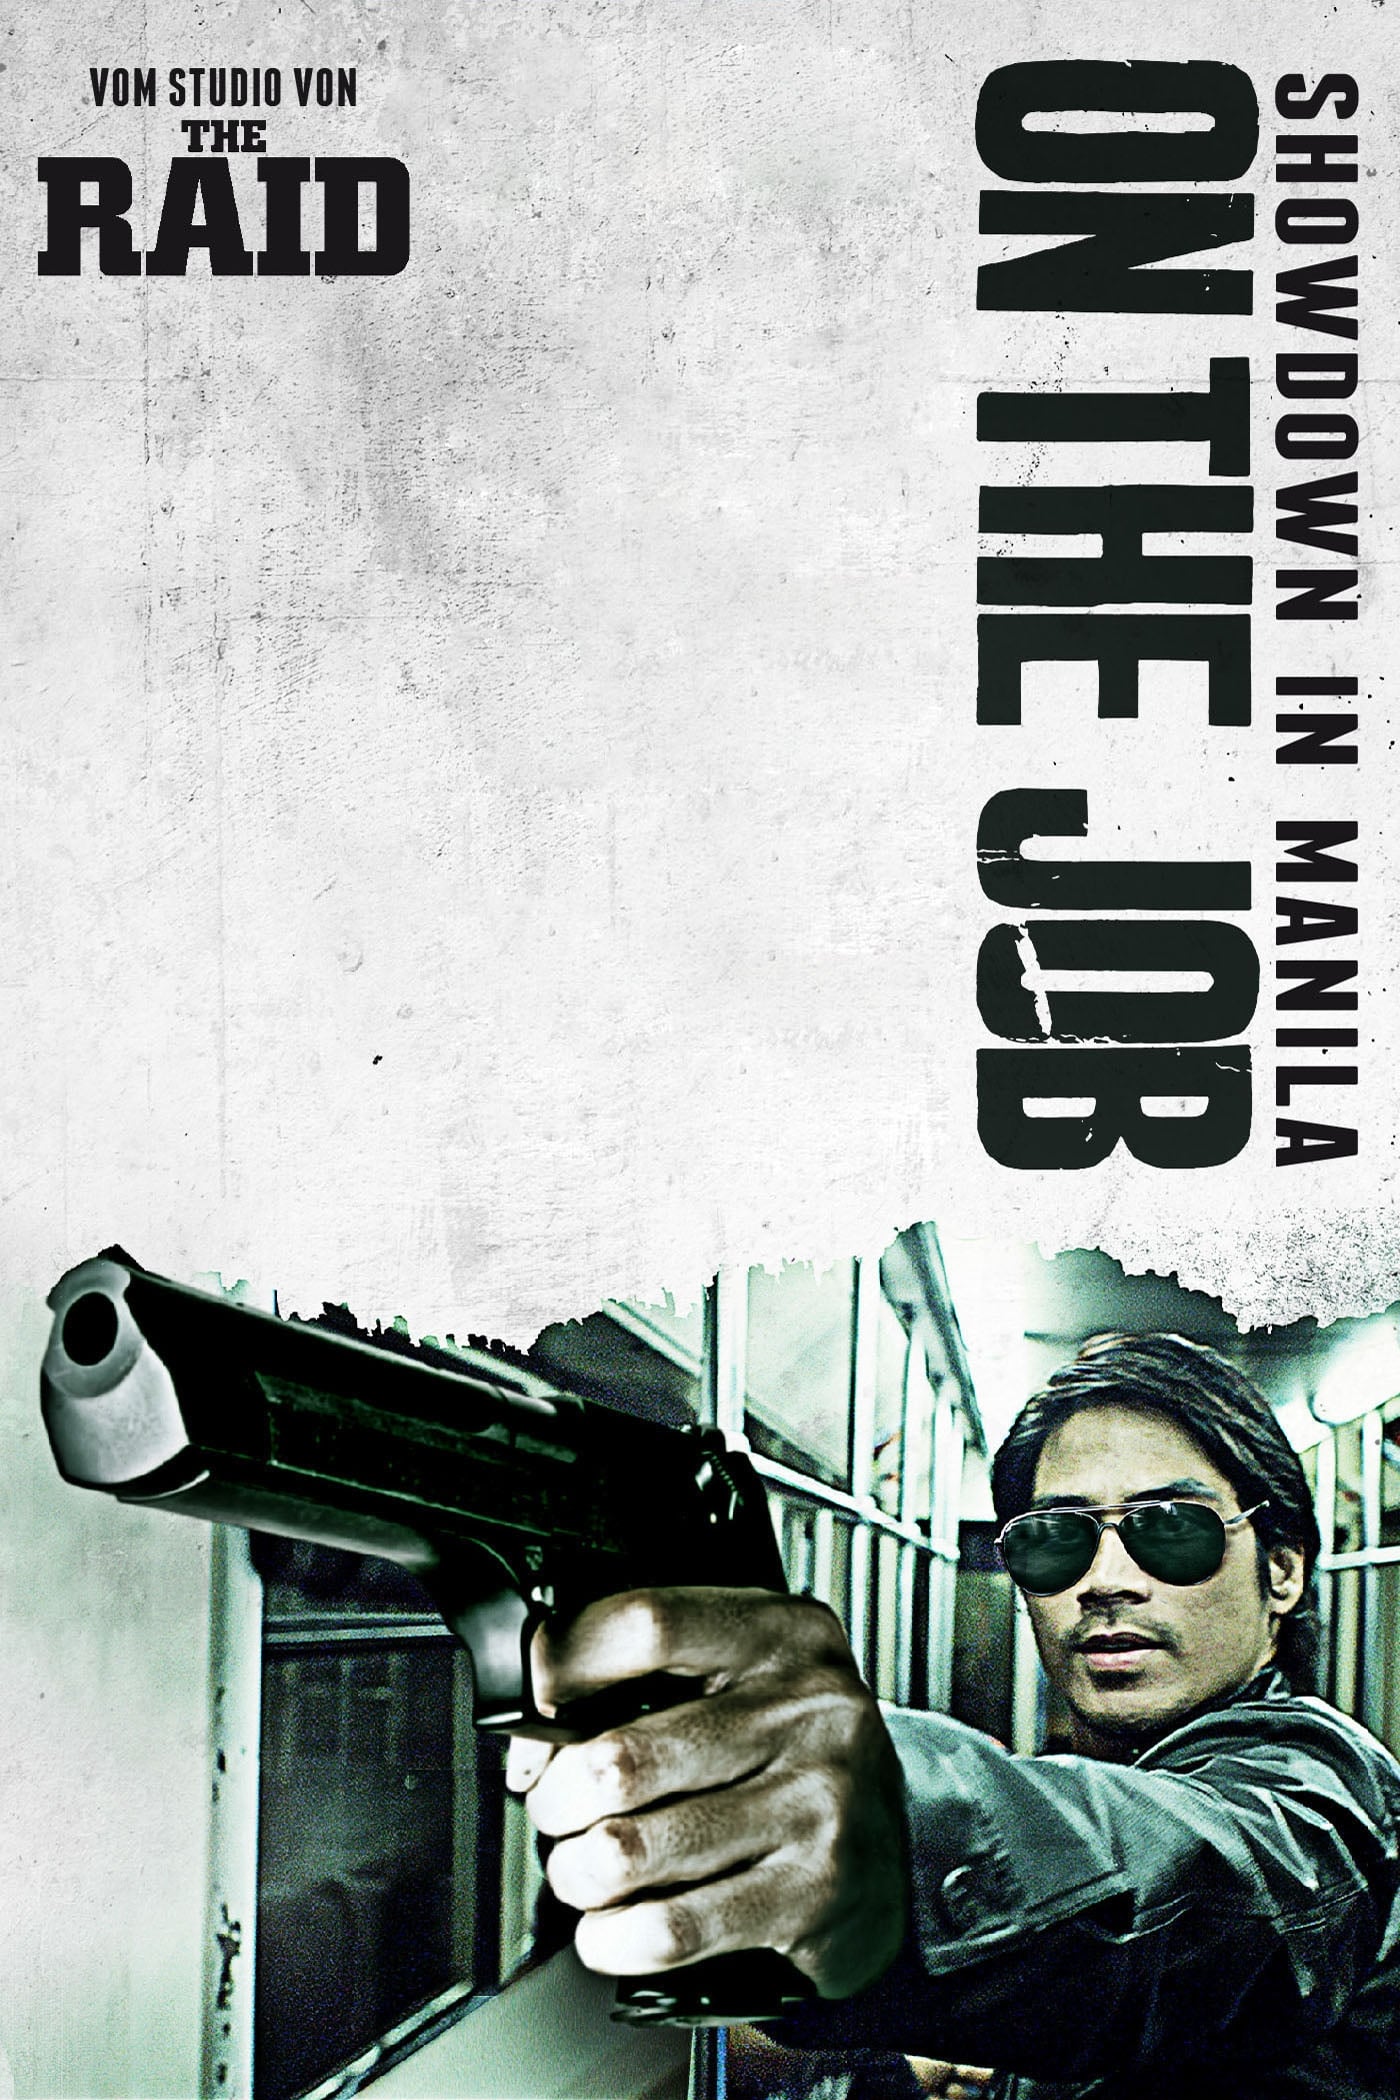 watch-on-the-job-piolo-full-movie-for-free